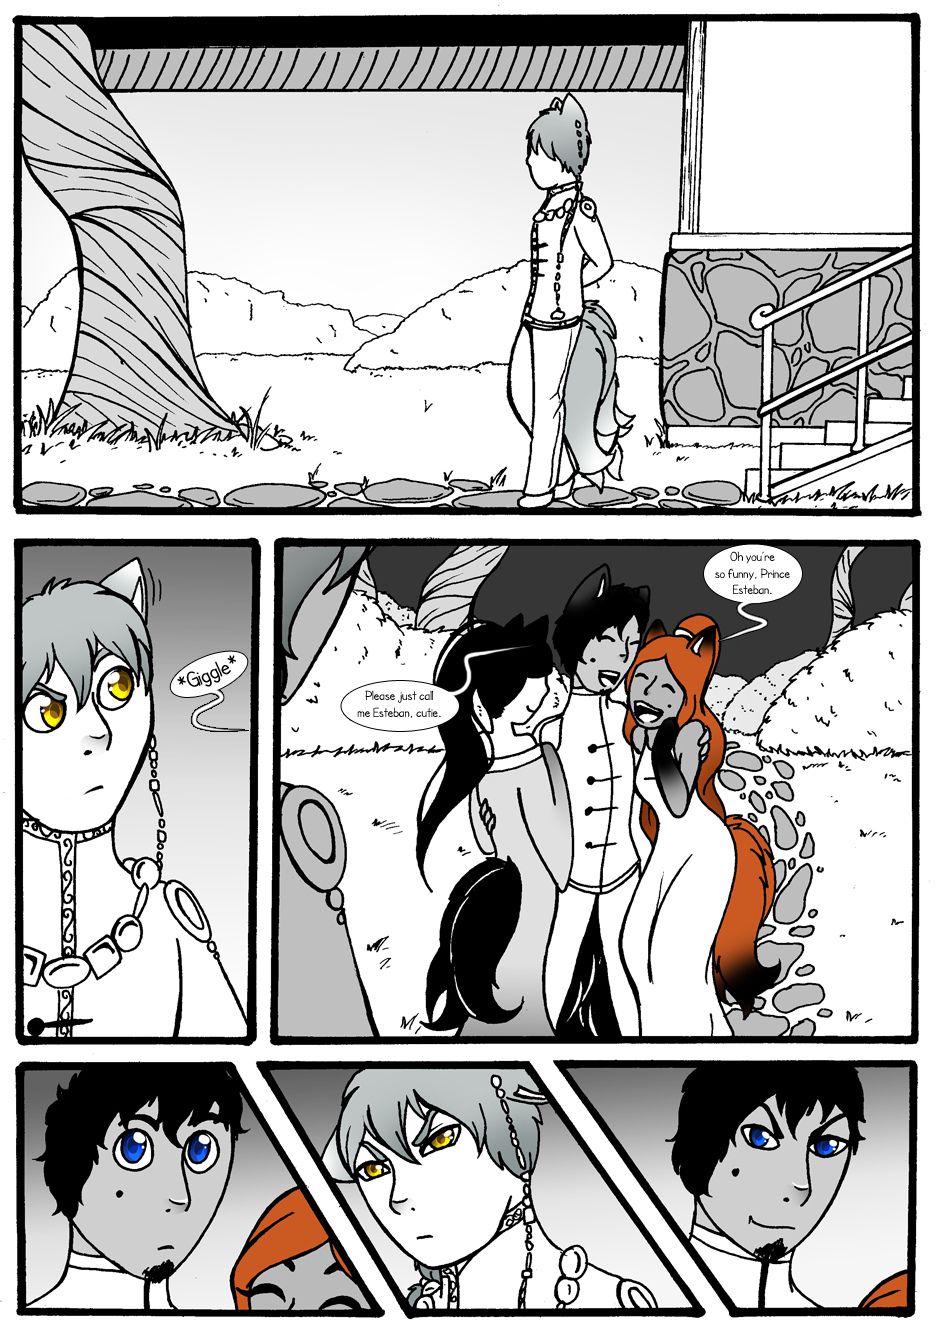 [Jeny-jen94] Between Kings and Queens [Ongoing] 29